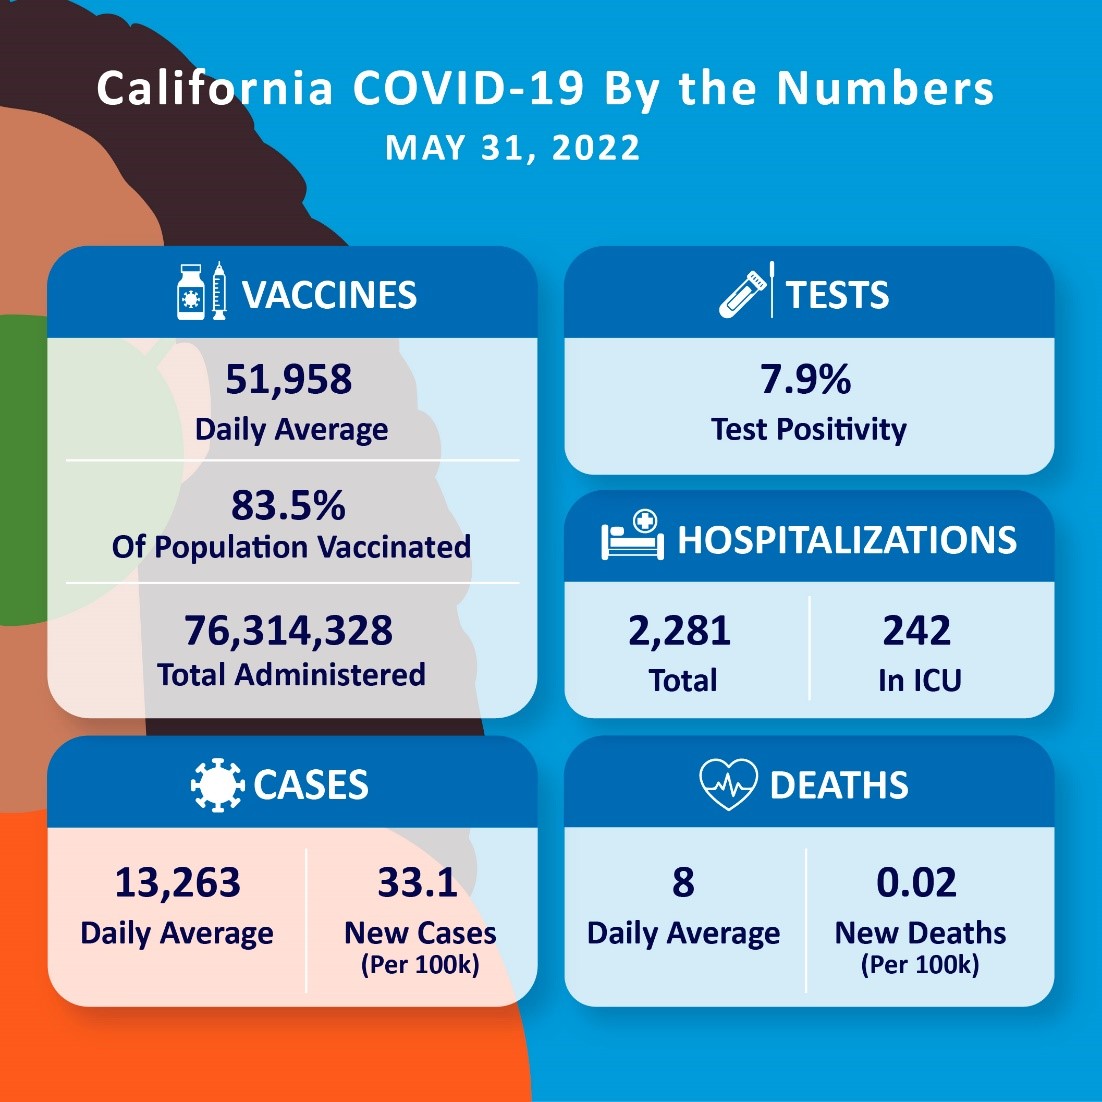 COVID-19 by the Numbers